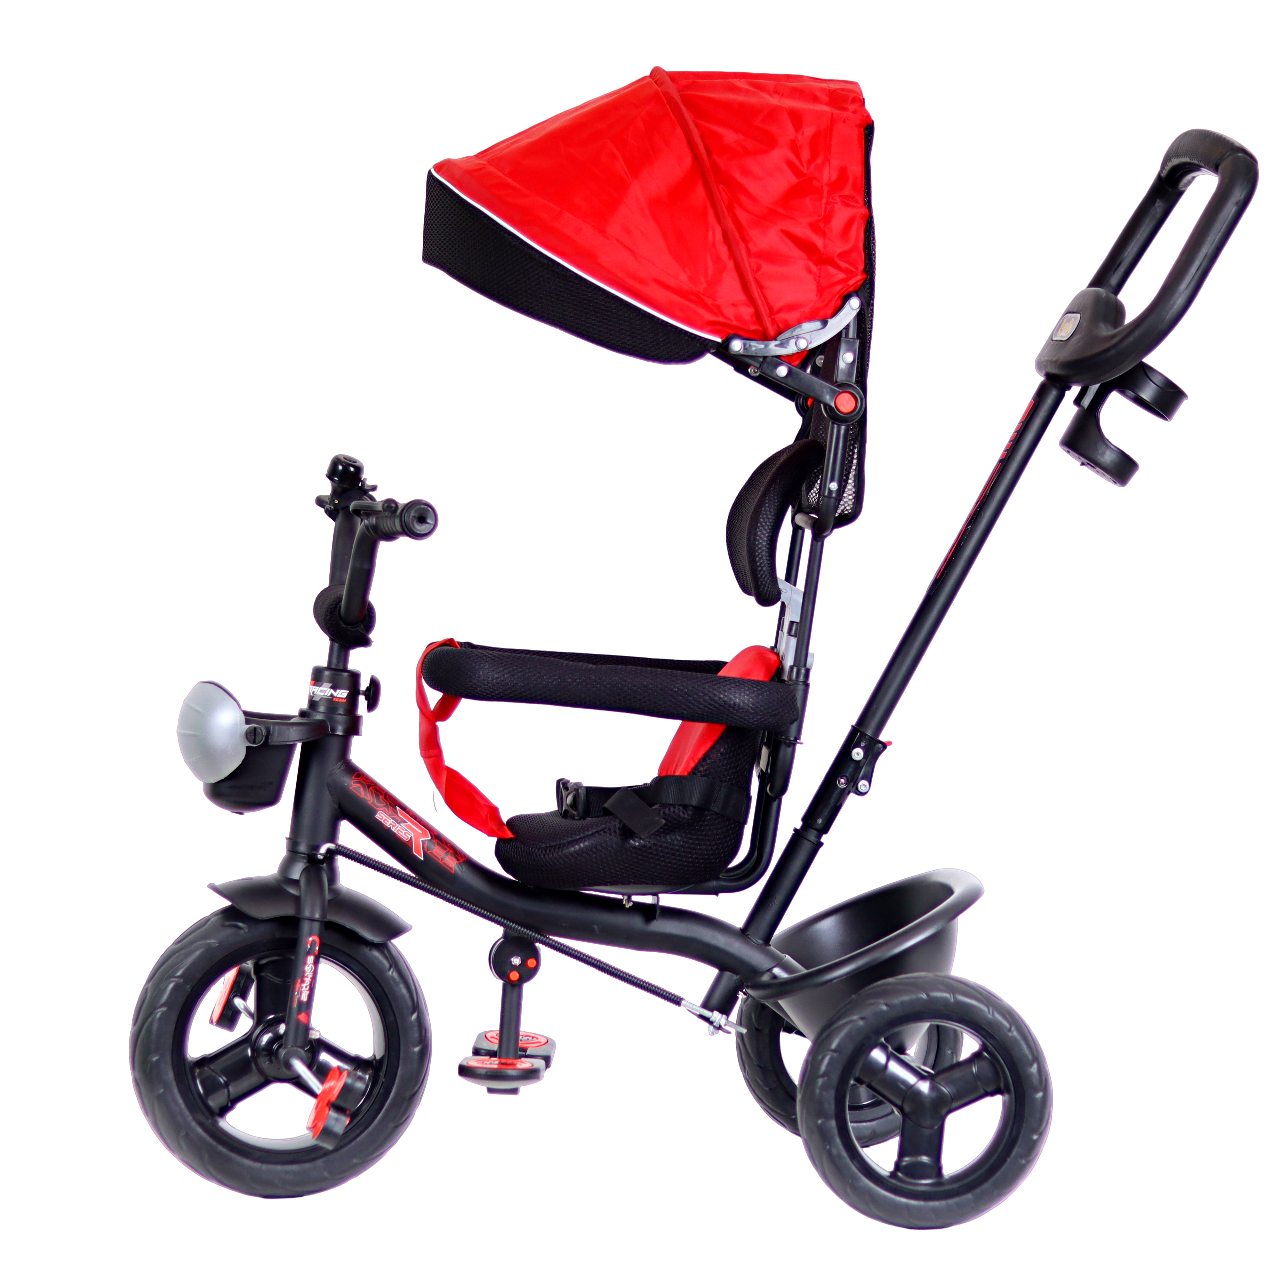 Luusa R1 500 Pro Tricycle for Kids - Hooded, Adjustable, and Safe